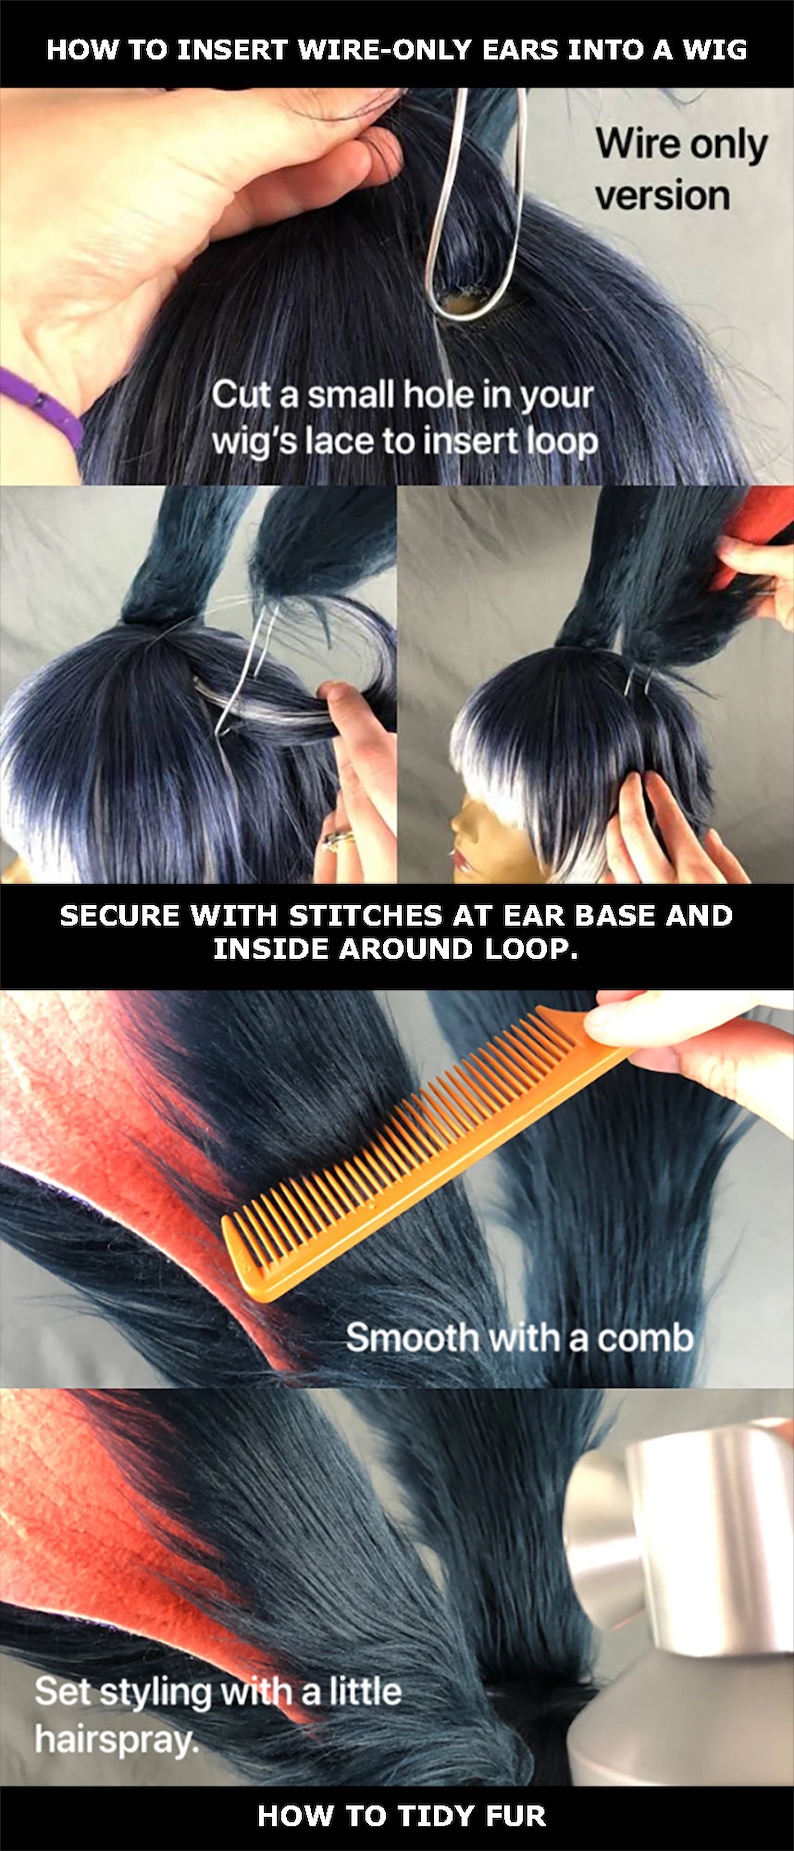 How to Insert wire-only ears into a wig. Cut a small hole into your wig's lace and insert loop. Secure with stitching around ear base and inside around wire loop. Smooth with a comb and set with a little hairspray to tidy fur.